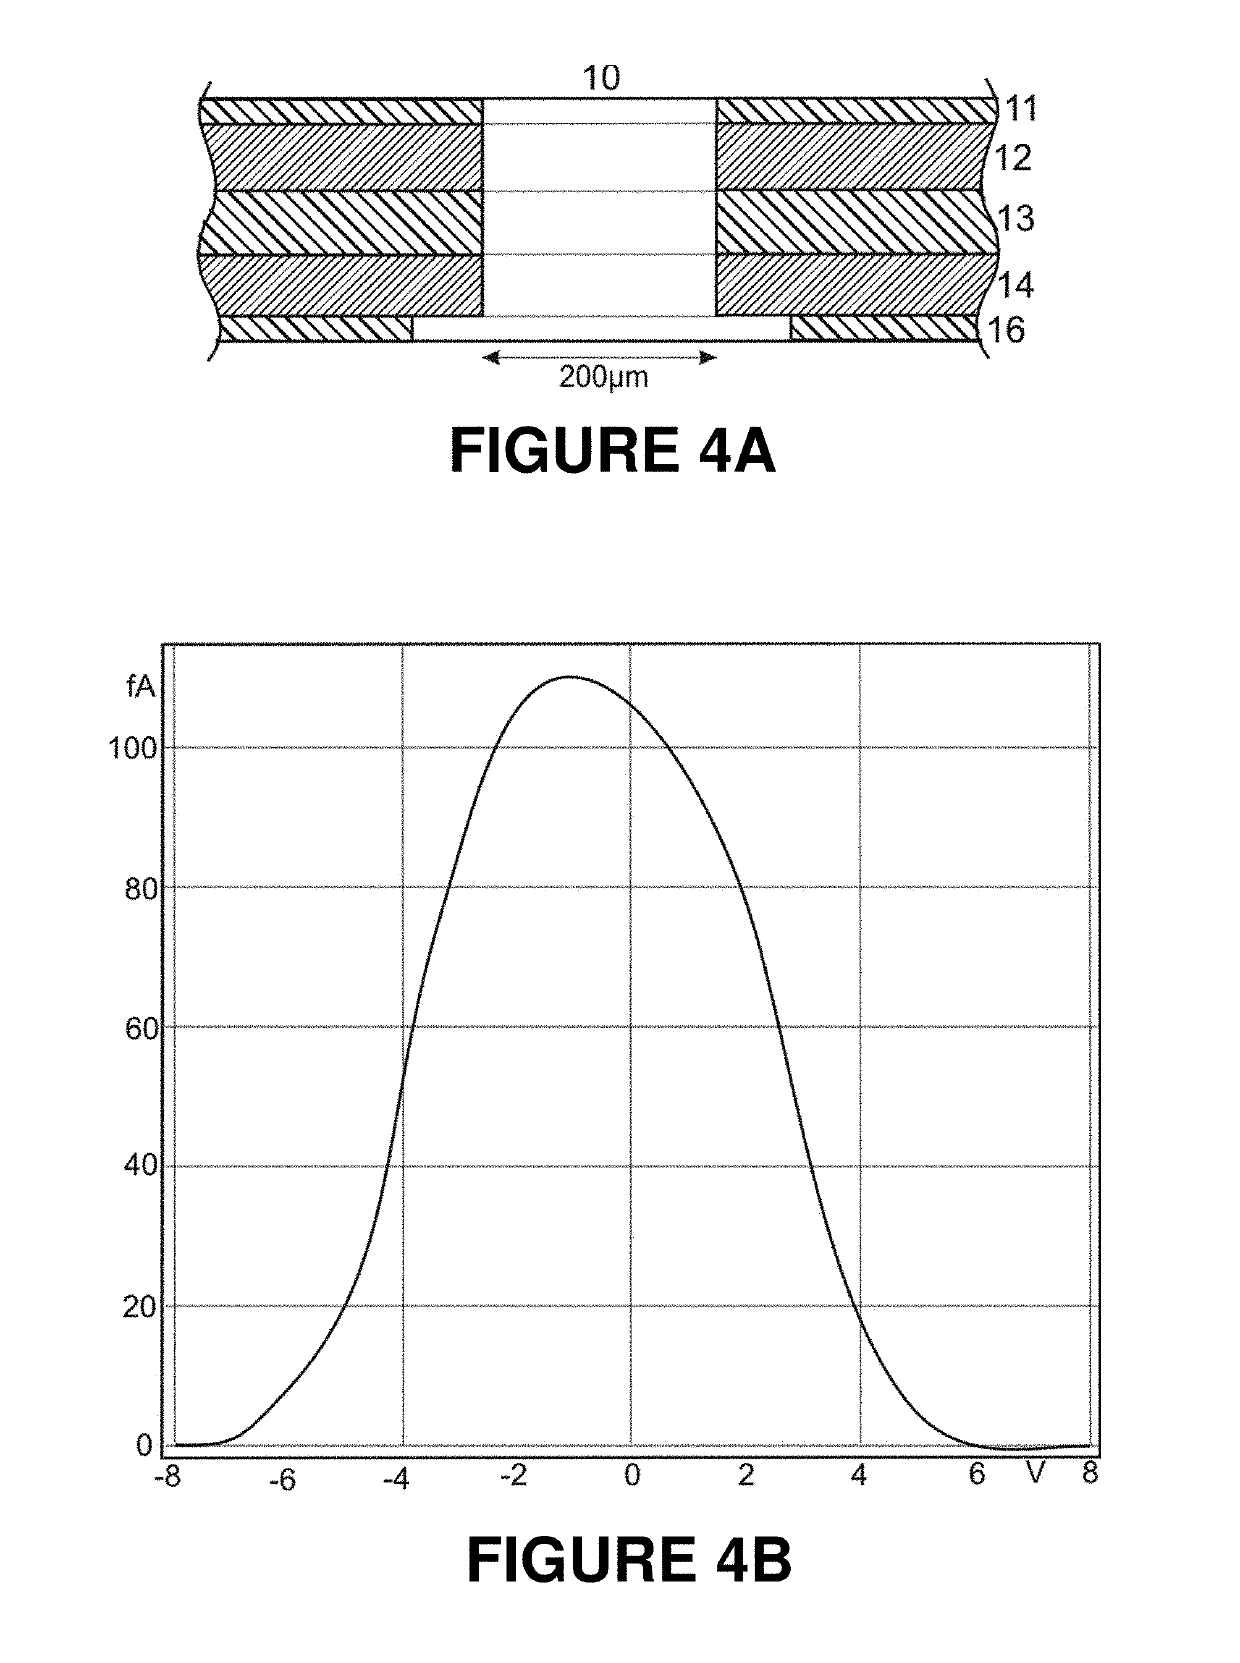 Gating element in ion mobility spectrometers